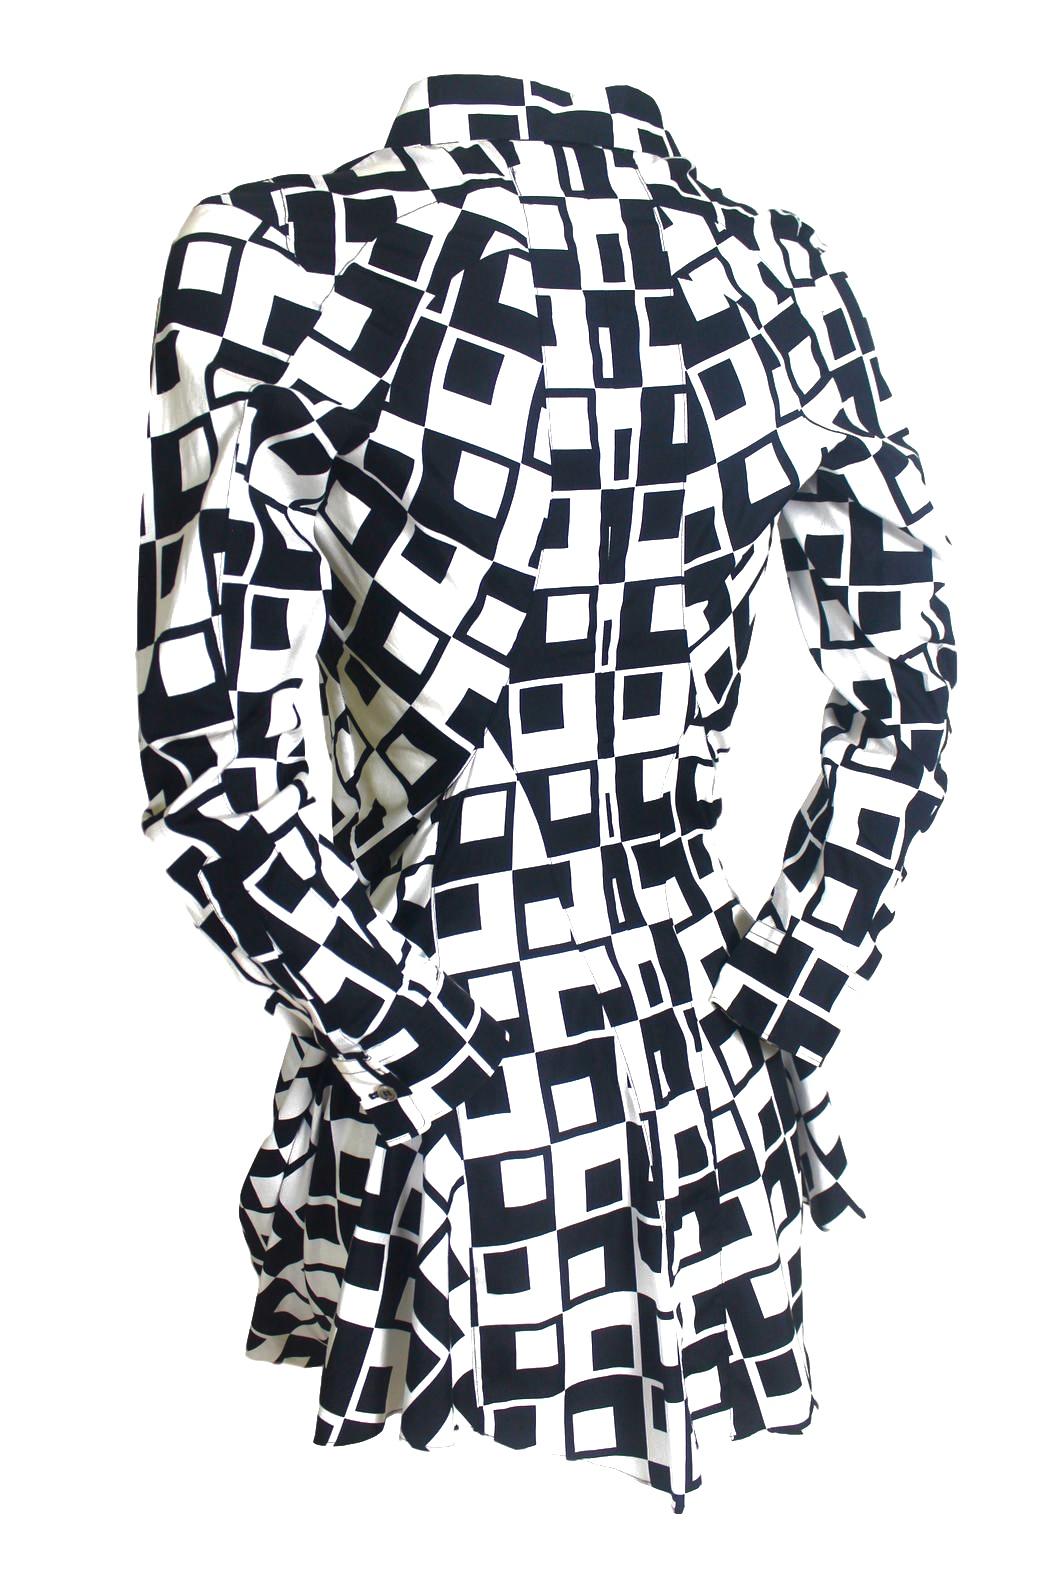 Comme des Garcons Junya Watanabe Geometric Dress AD 2009 For Sale 4